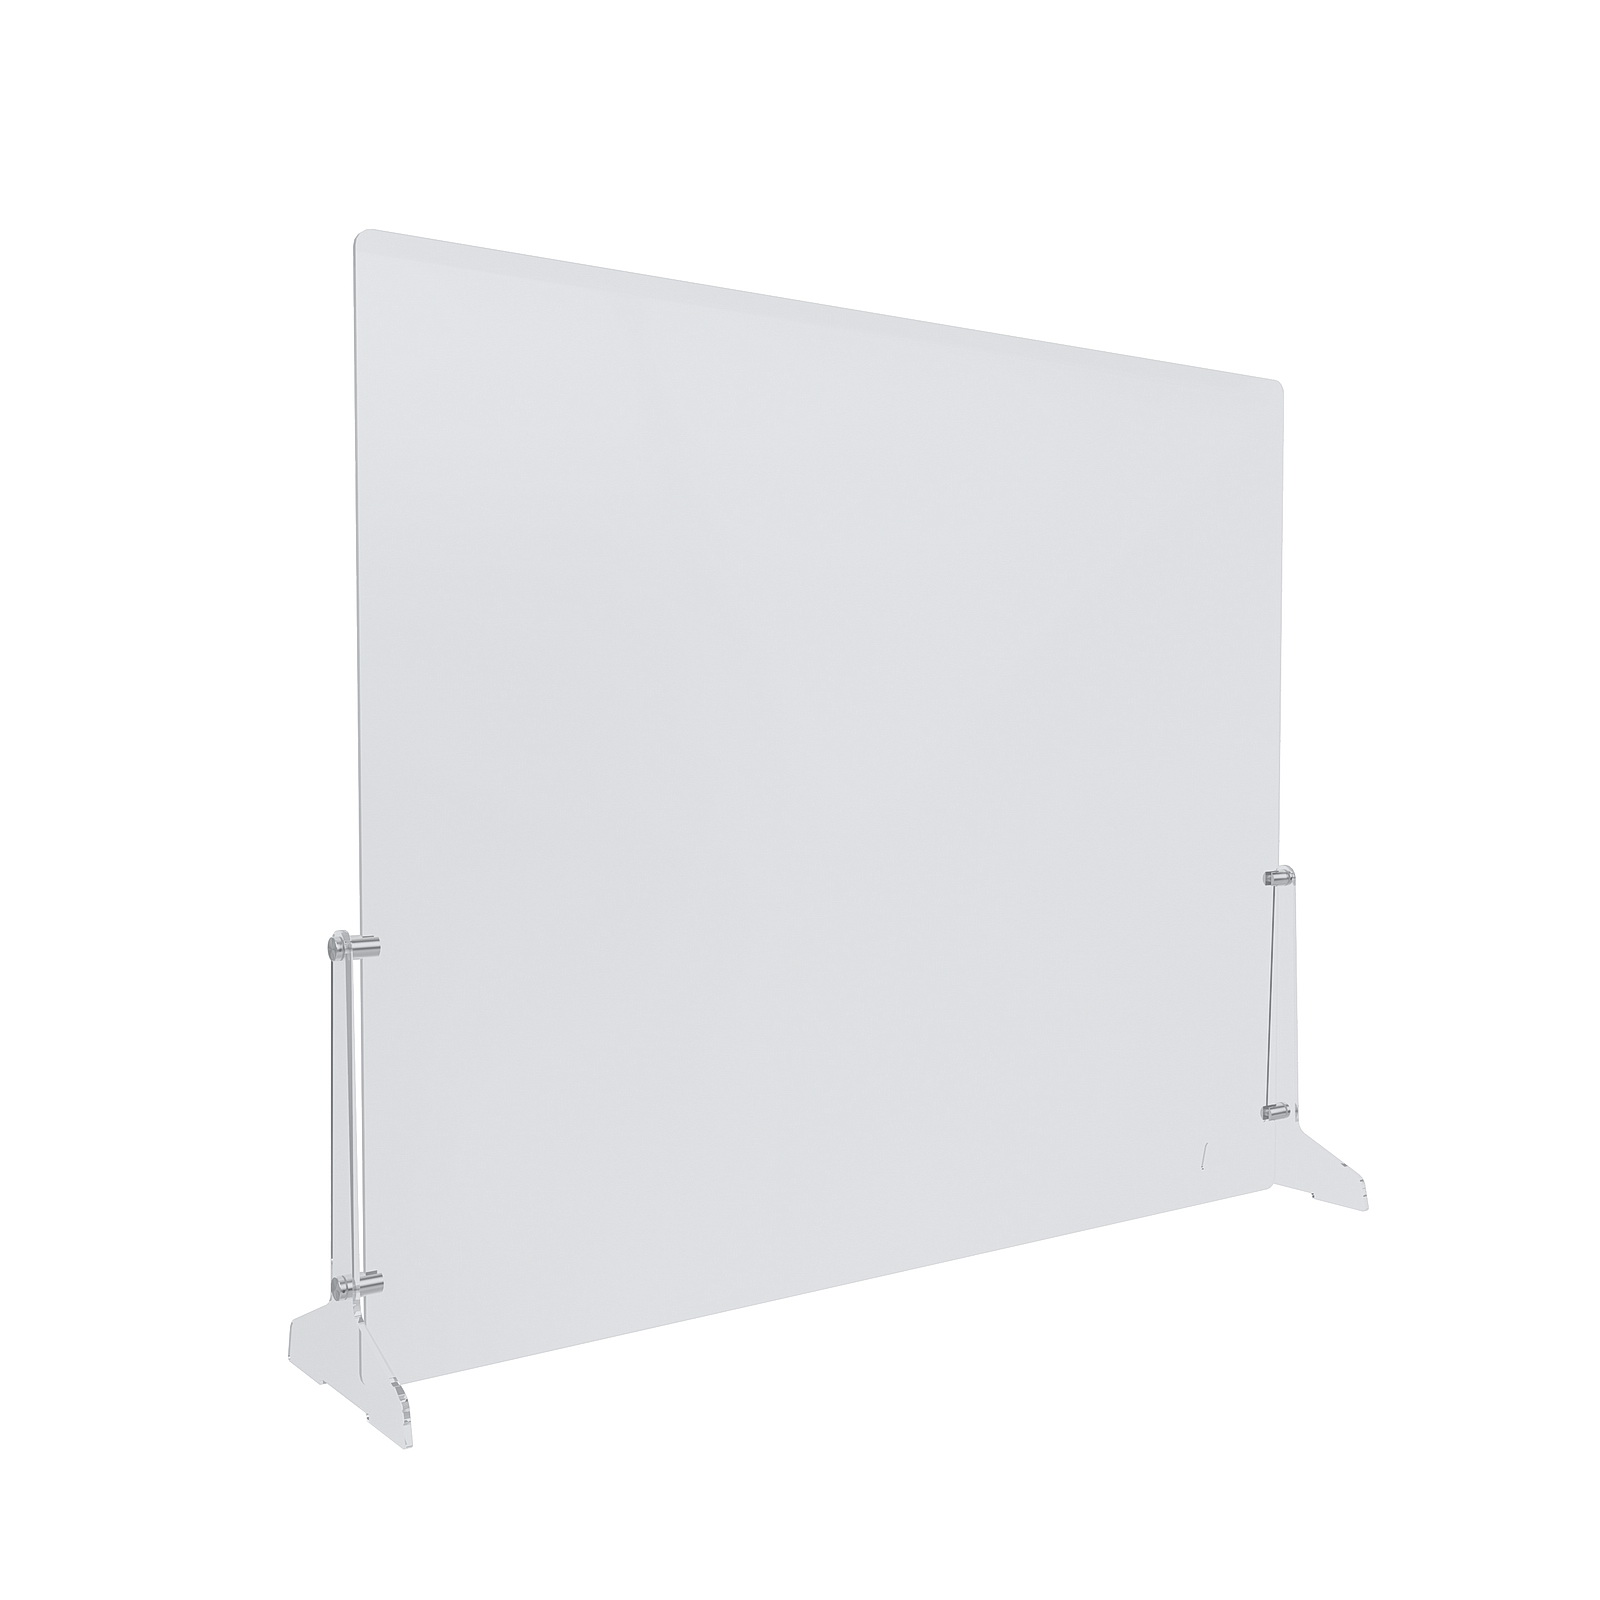 Clear Acrylic Sneeze Guard 36'' Wide x 30'' Tall, with (2) 7'' Wide x 12-5/16'' Deep Feet on the Side, and (4) Aluminum Clear Anodized Forks / Standoffs.